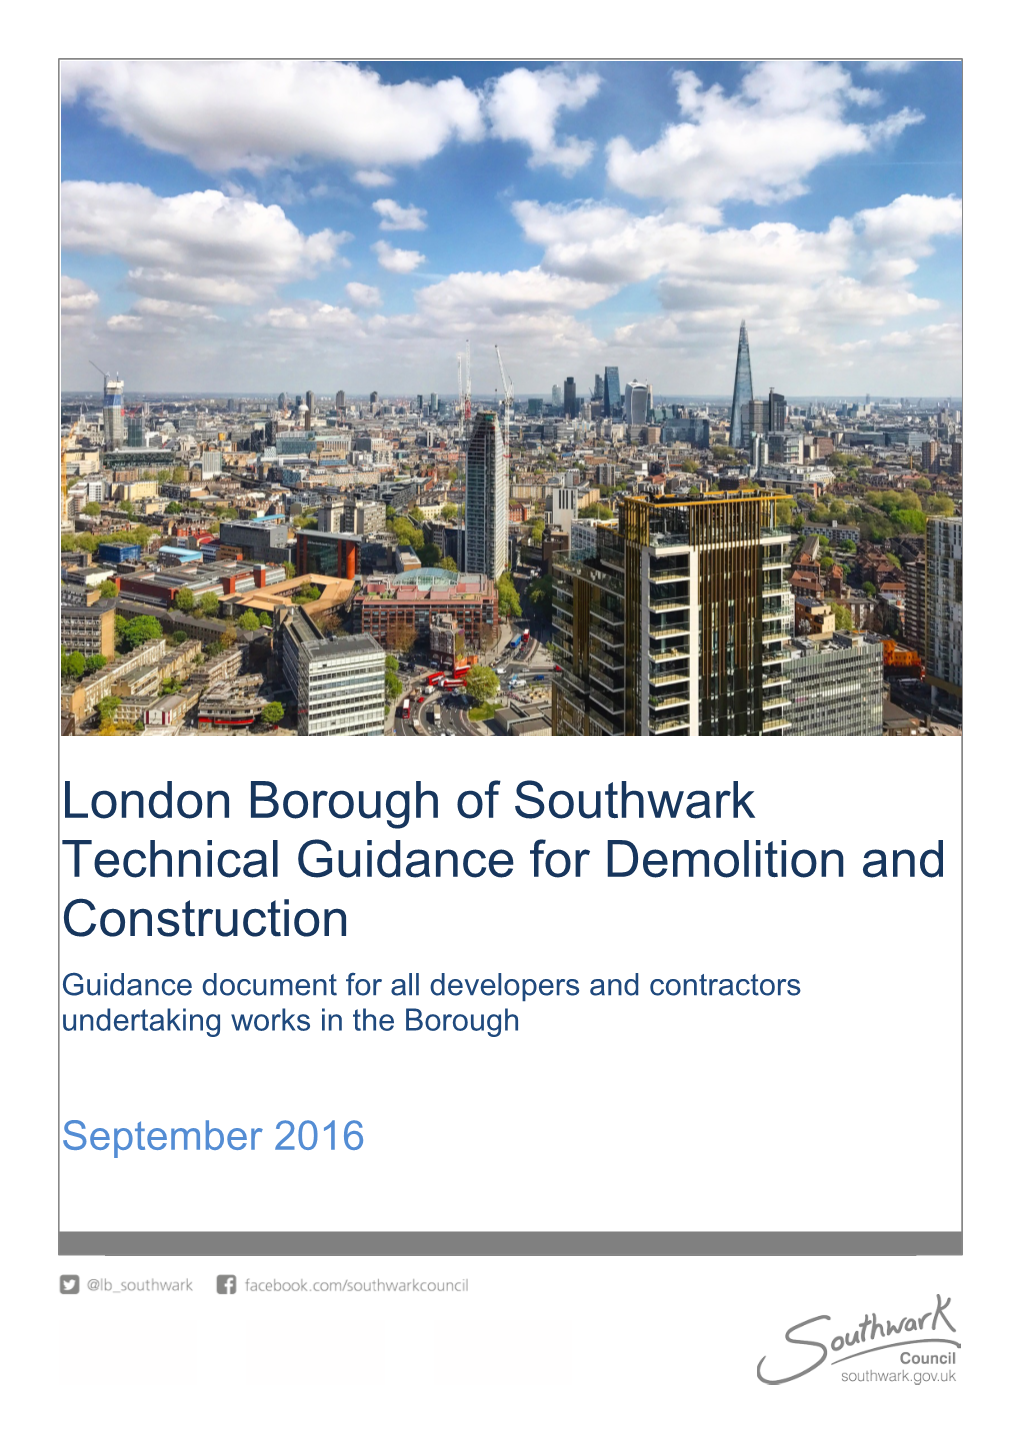 Southwark's Technical Guidance for Demolition and Construction